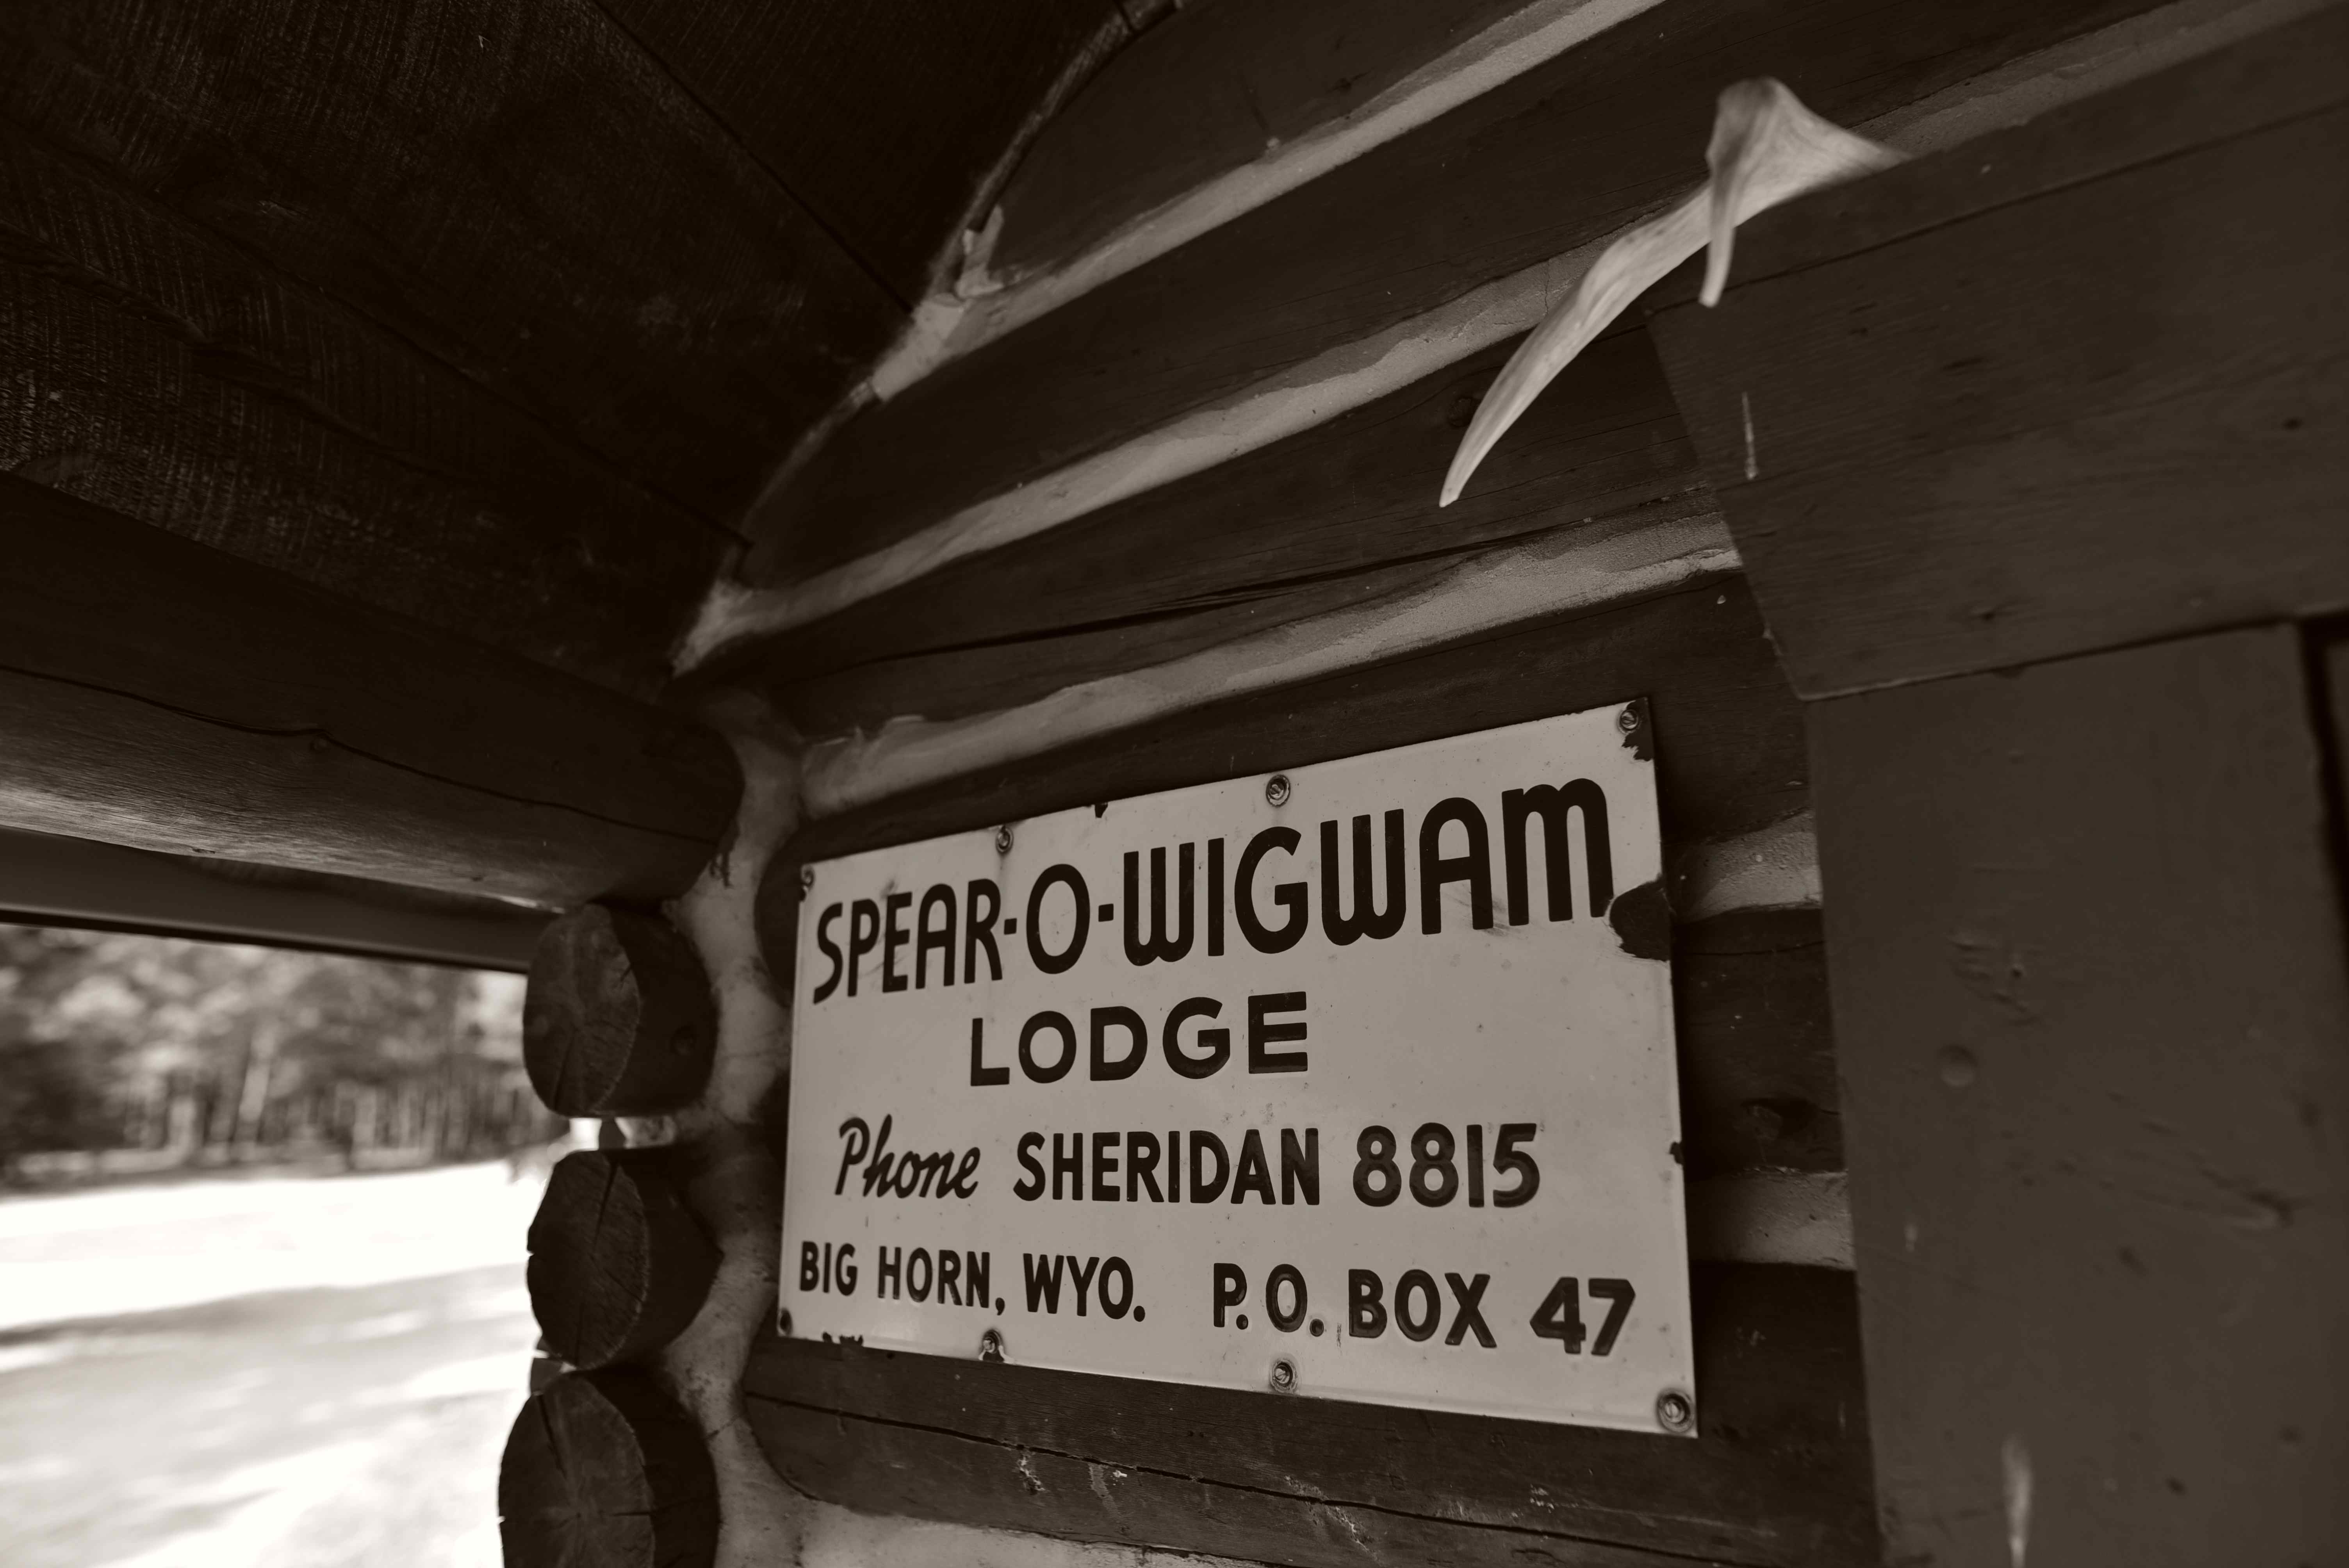 The historical Spear-O-Wigwam dude ranch , where Hemingway fished and wrote in 1928, is the setting for the Hemingway’s Wyoming weekend offshoot of Left Bank Writers Retreat (photo by Travis Cebula).